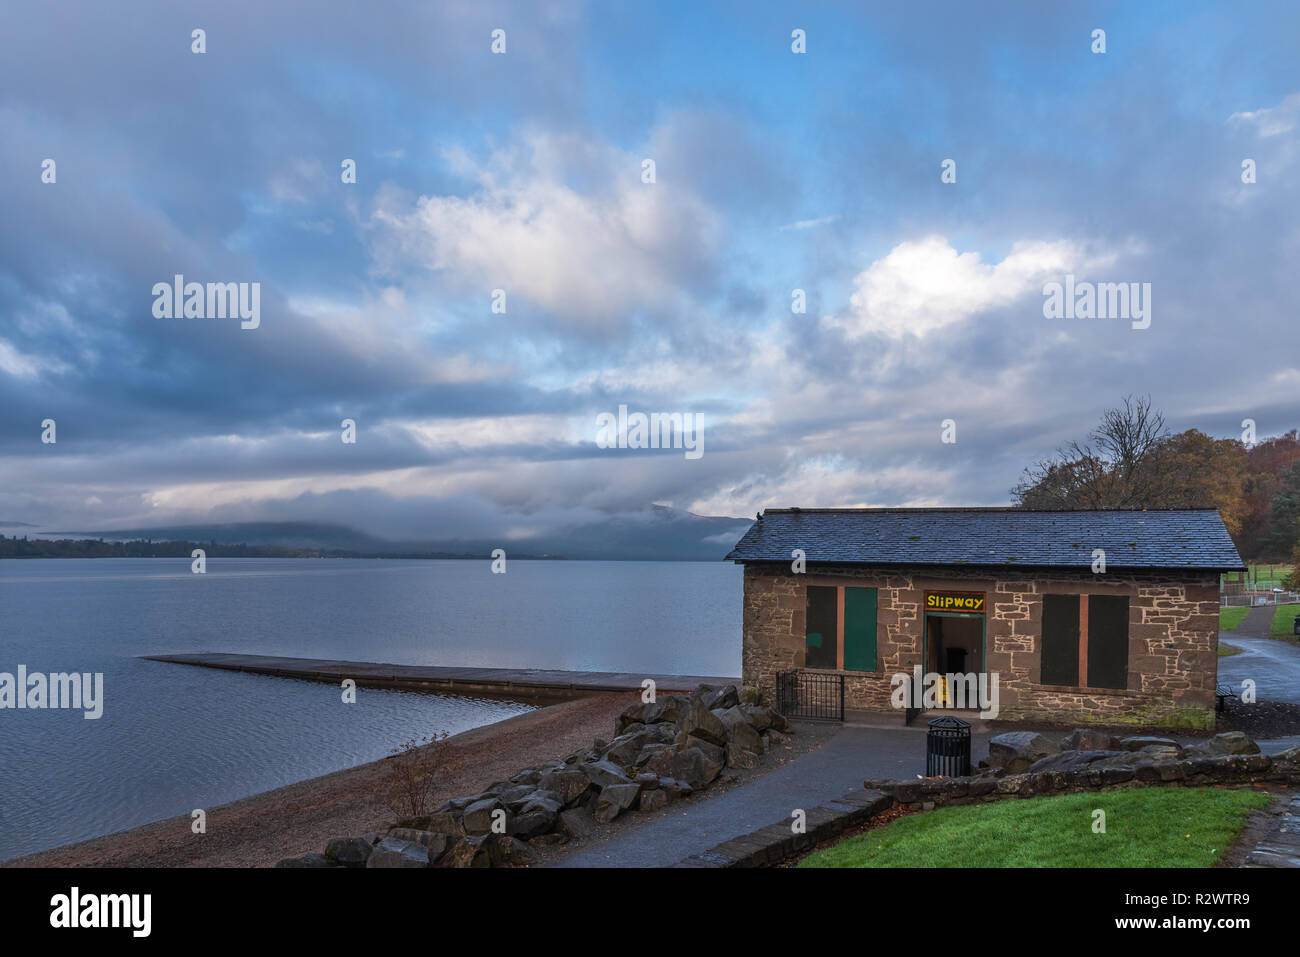 The Slipway Cafe at Balloch Park on the shores of Loch Lomond with the Luss hills in the background.. Stock Photo